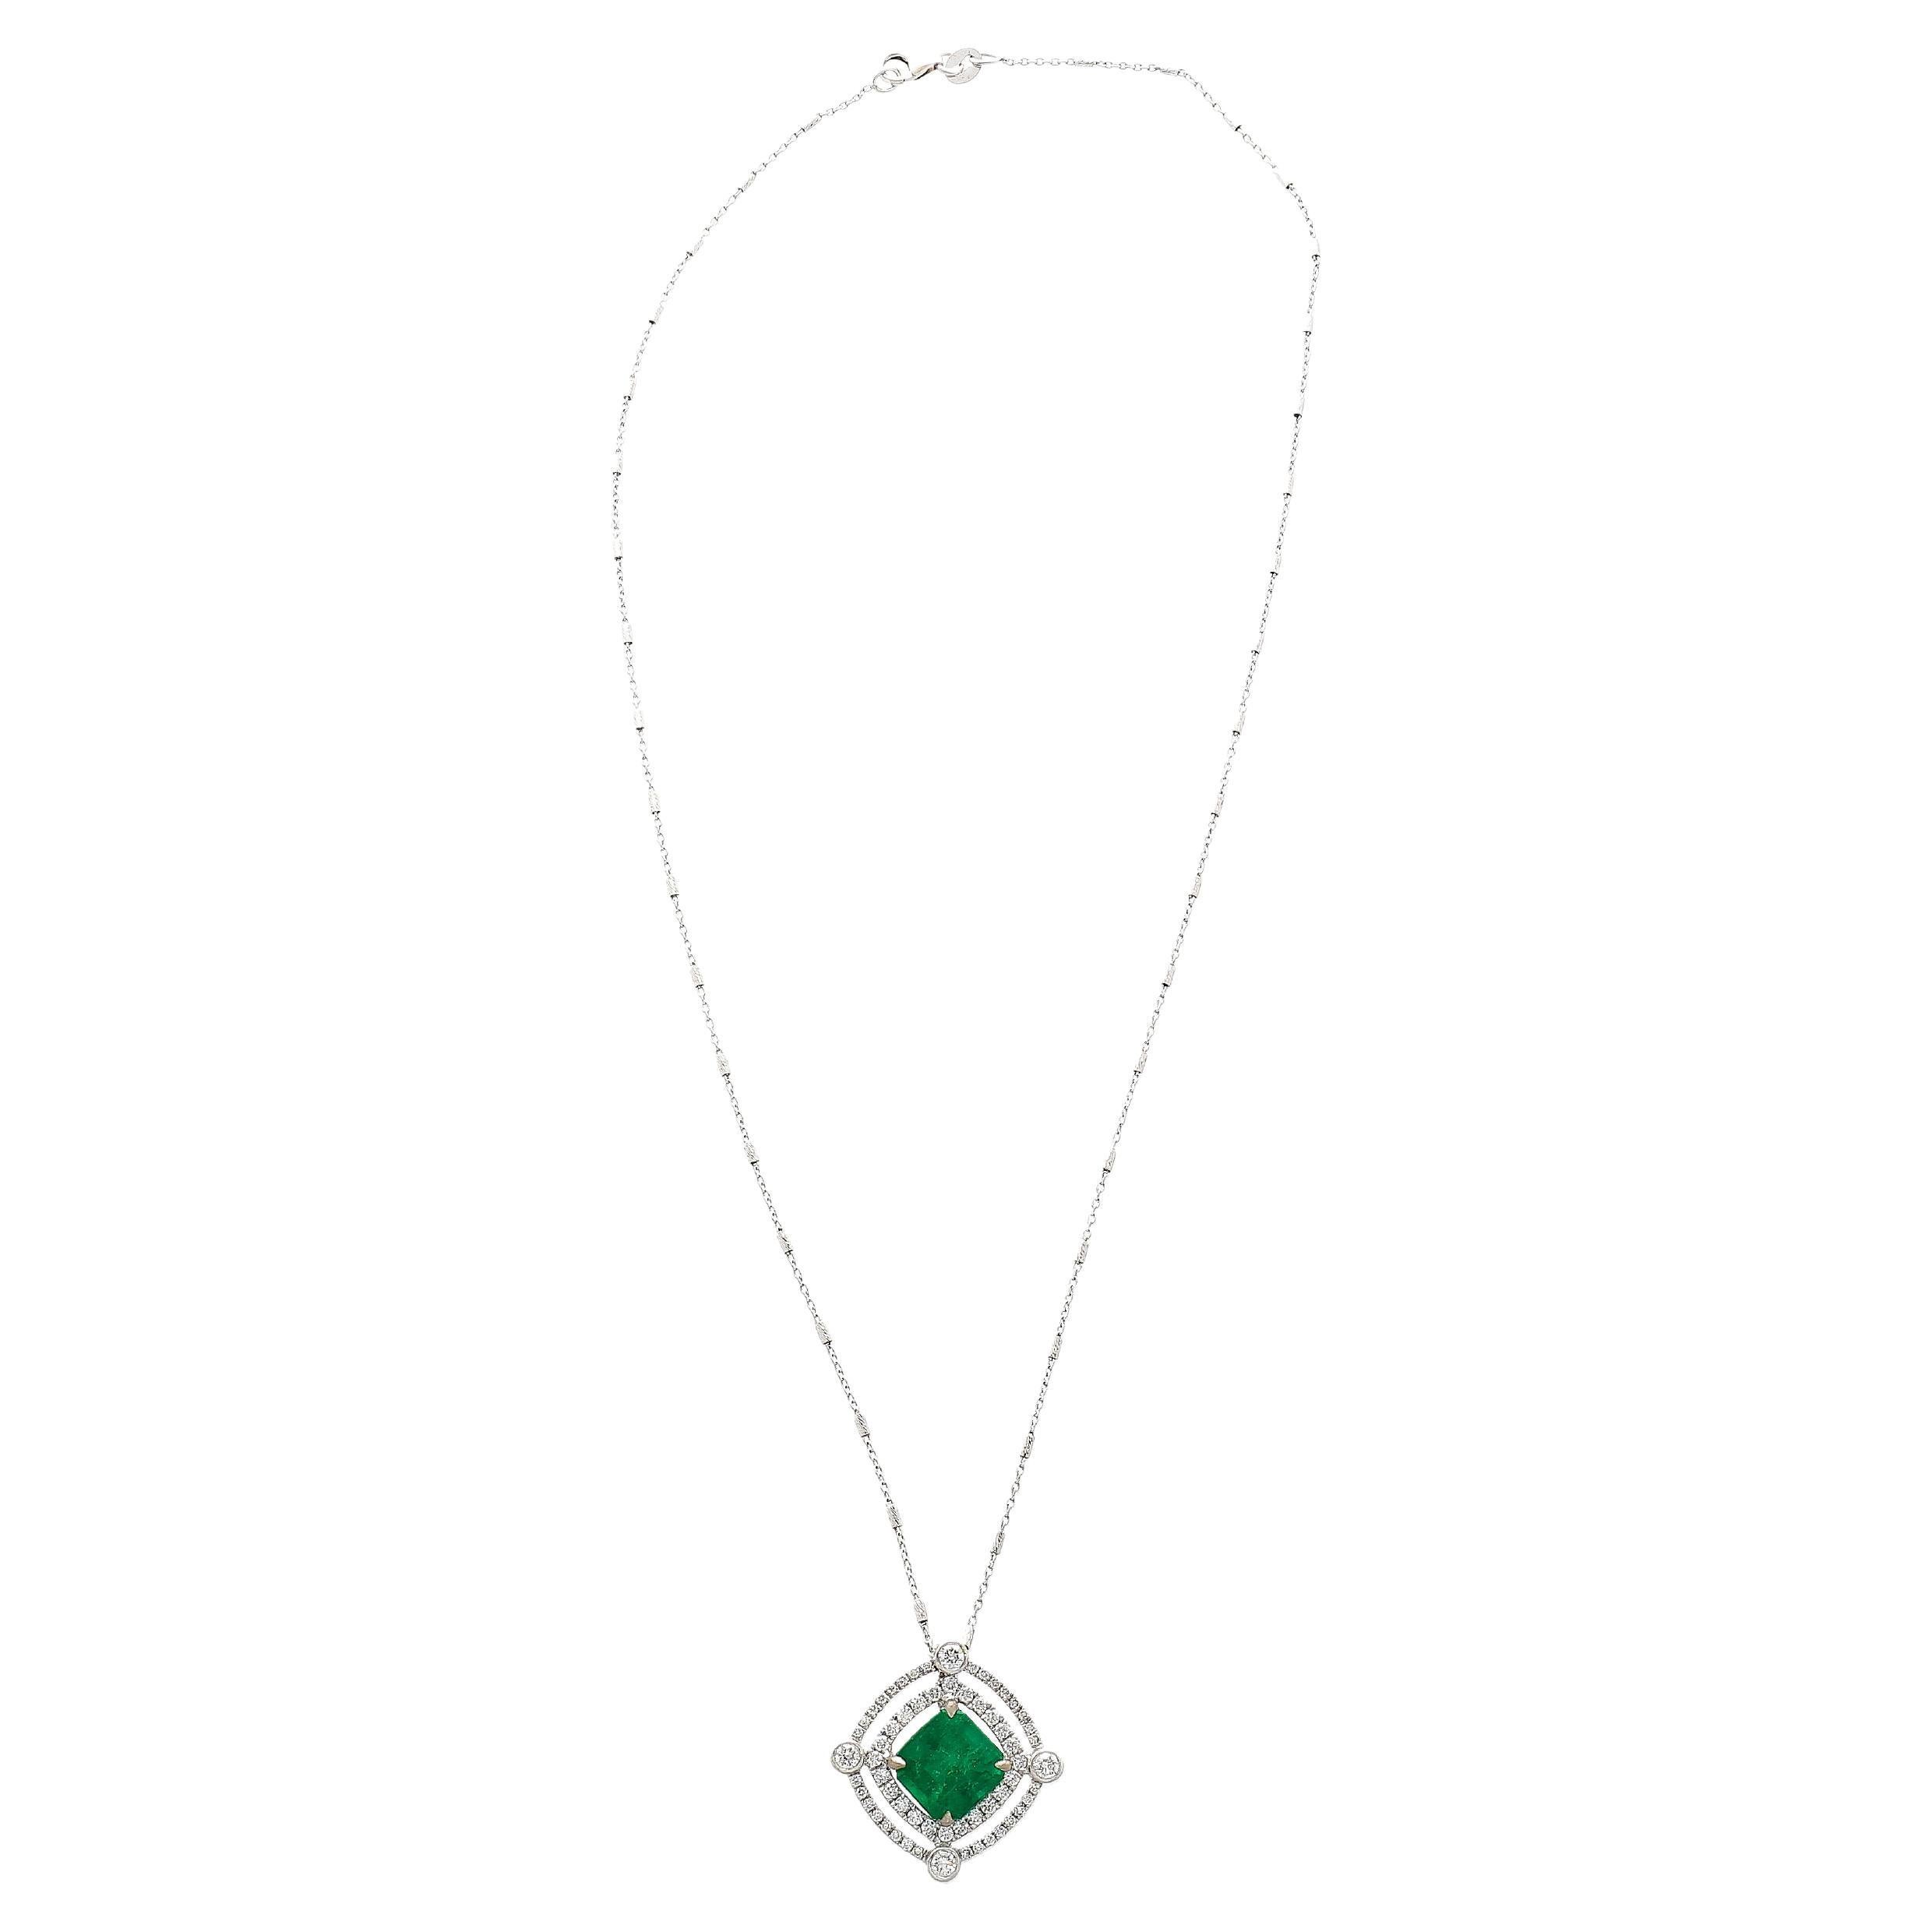 Emerald Cut 2.72CT GRS Certified Minor Oil Muzo Green Colombian Emerald Pendant Necklace For Sale